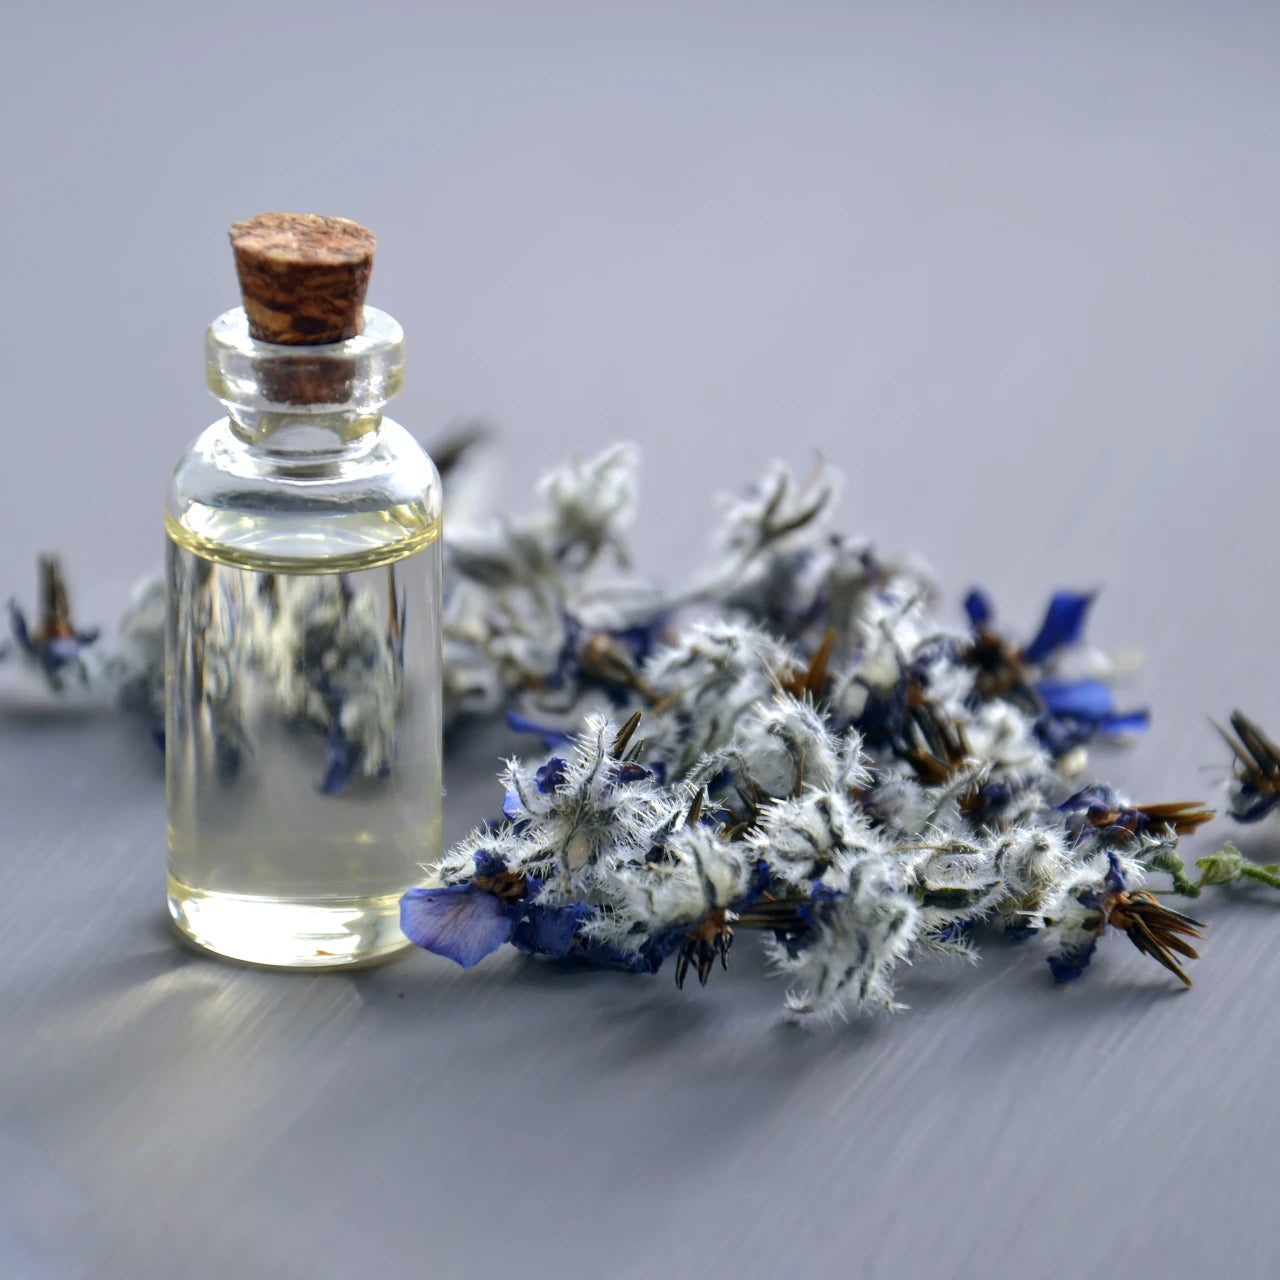 The Benefits of Aromatherapy in Your Home: How Scented Candles and Essential Oils Can Improve Your Living Space and Mood